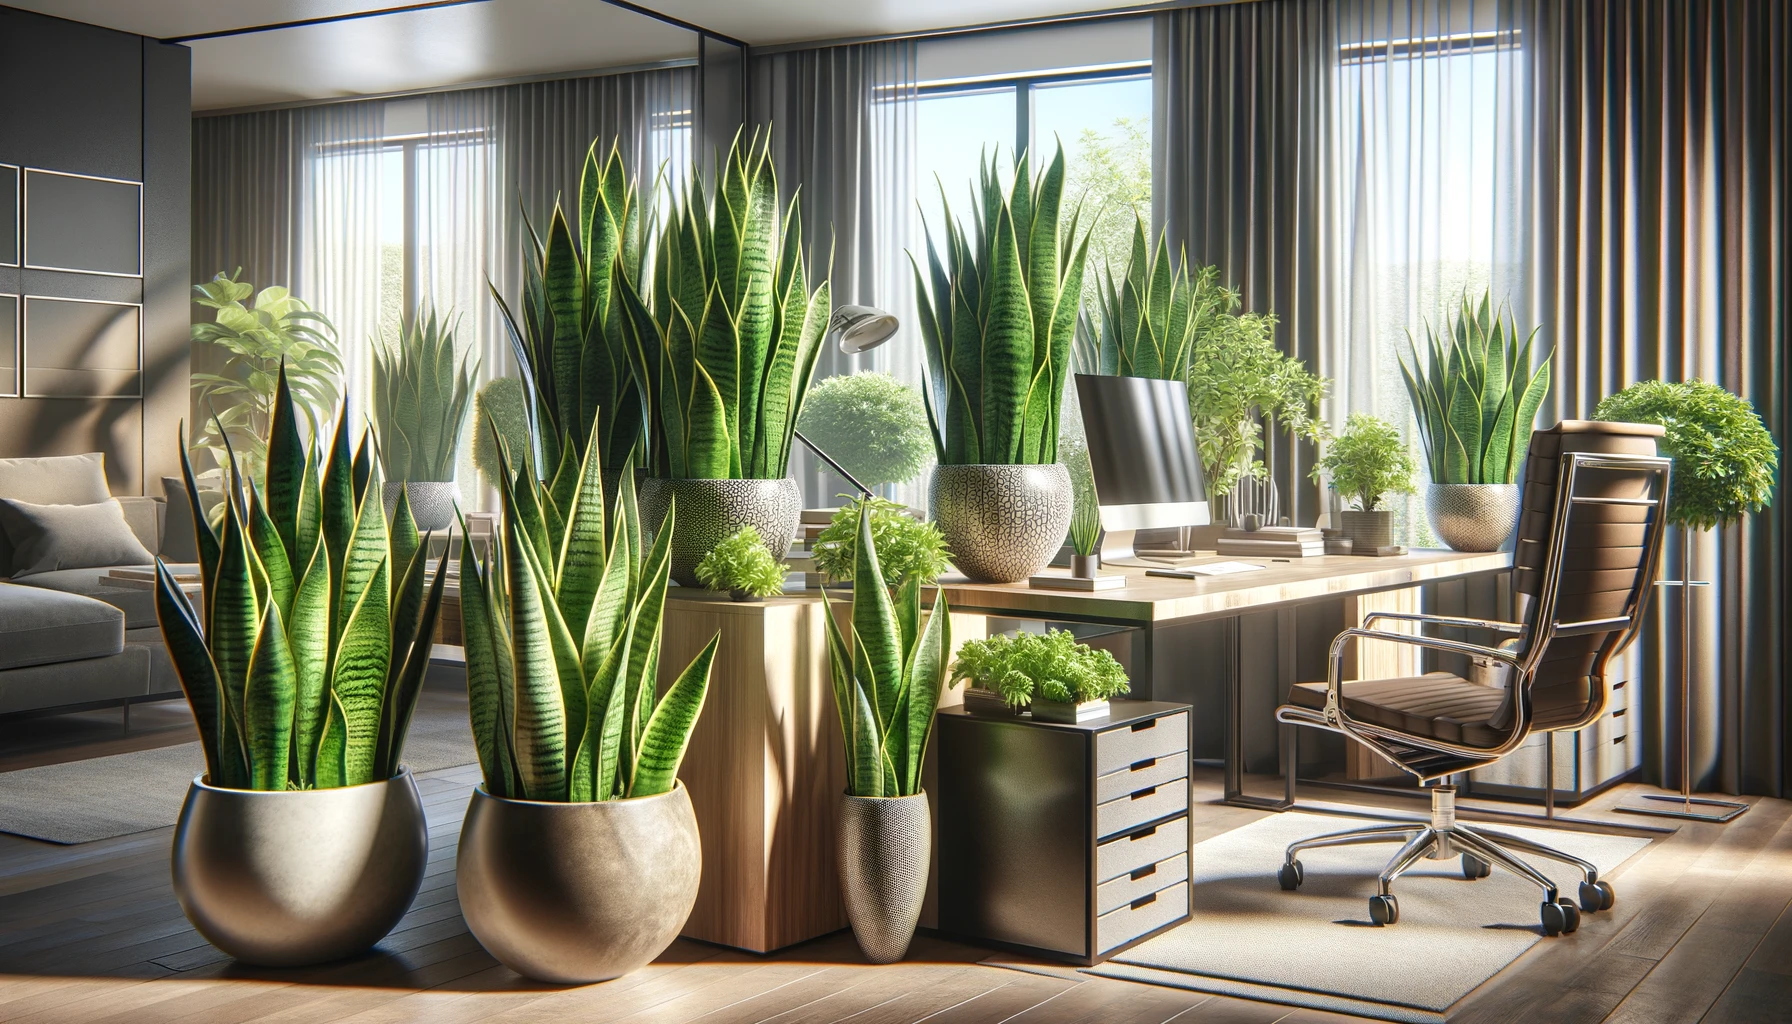 Hyper-realistic image of diverse succulent snake plants in elegant ceramic and glass pots, set in a contemporary home office. The office features a sleek desk, high-tech gadgets, and large windows with sheer curtains that allow natural light to accentuate the vibrant green leaves of the plants. The setup creates a calming and stylish atmosphere, enhancing the workspace with a refreshing natural element.